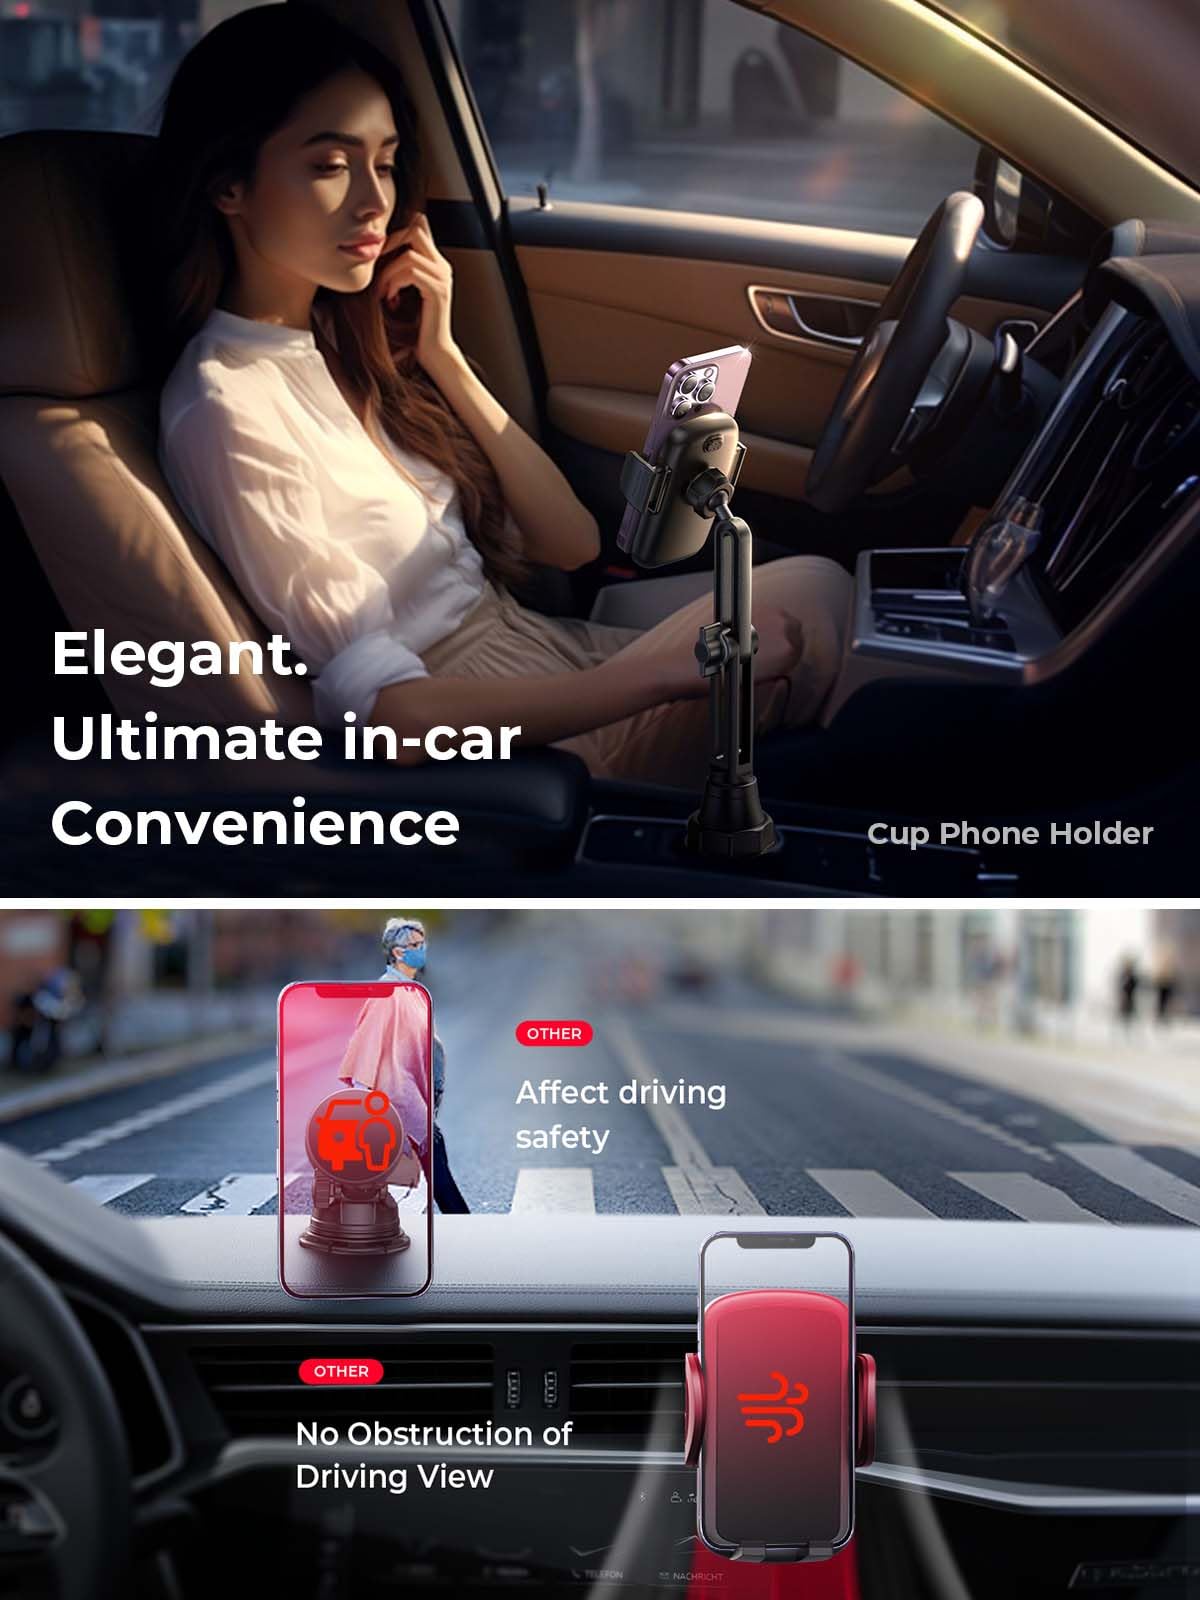 LISEN Cup Holder Phone Mount for Car, Upgraded Version Car Cup Phone Holder for Car Universal Adjustable Phone Holder Car Cup Holder for iPhone Samsung 23 Google All Smartphones 4-7 inches